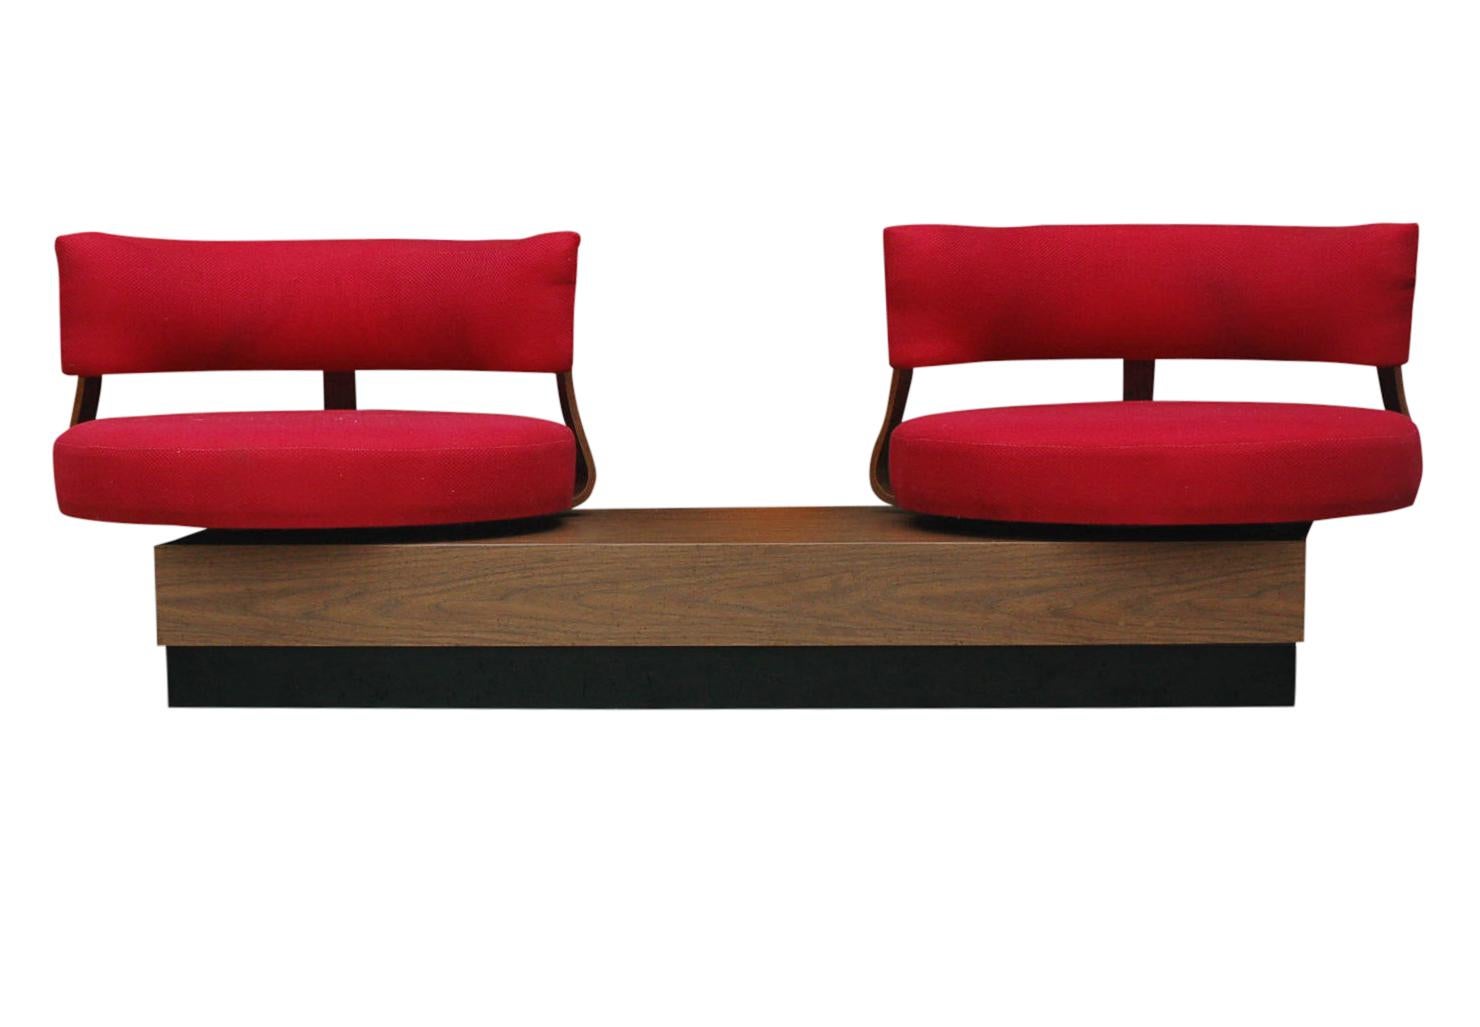 American Unique Mid-Century Modern Red Swivel Lounge Chairs Sofa on Platform Base